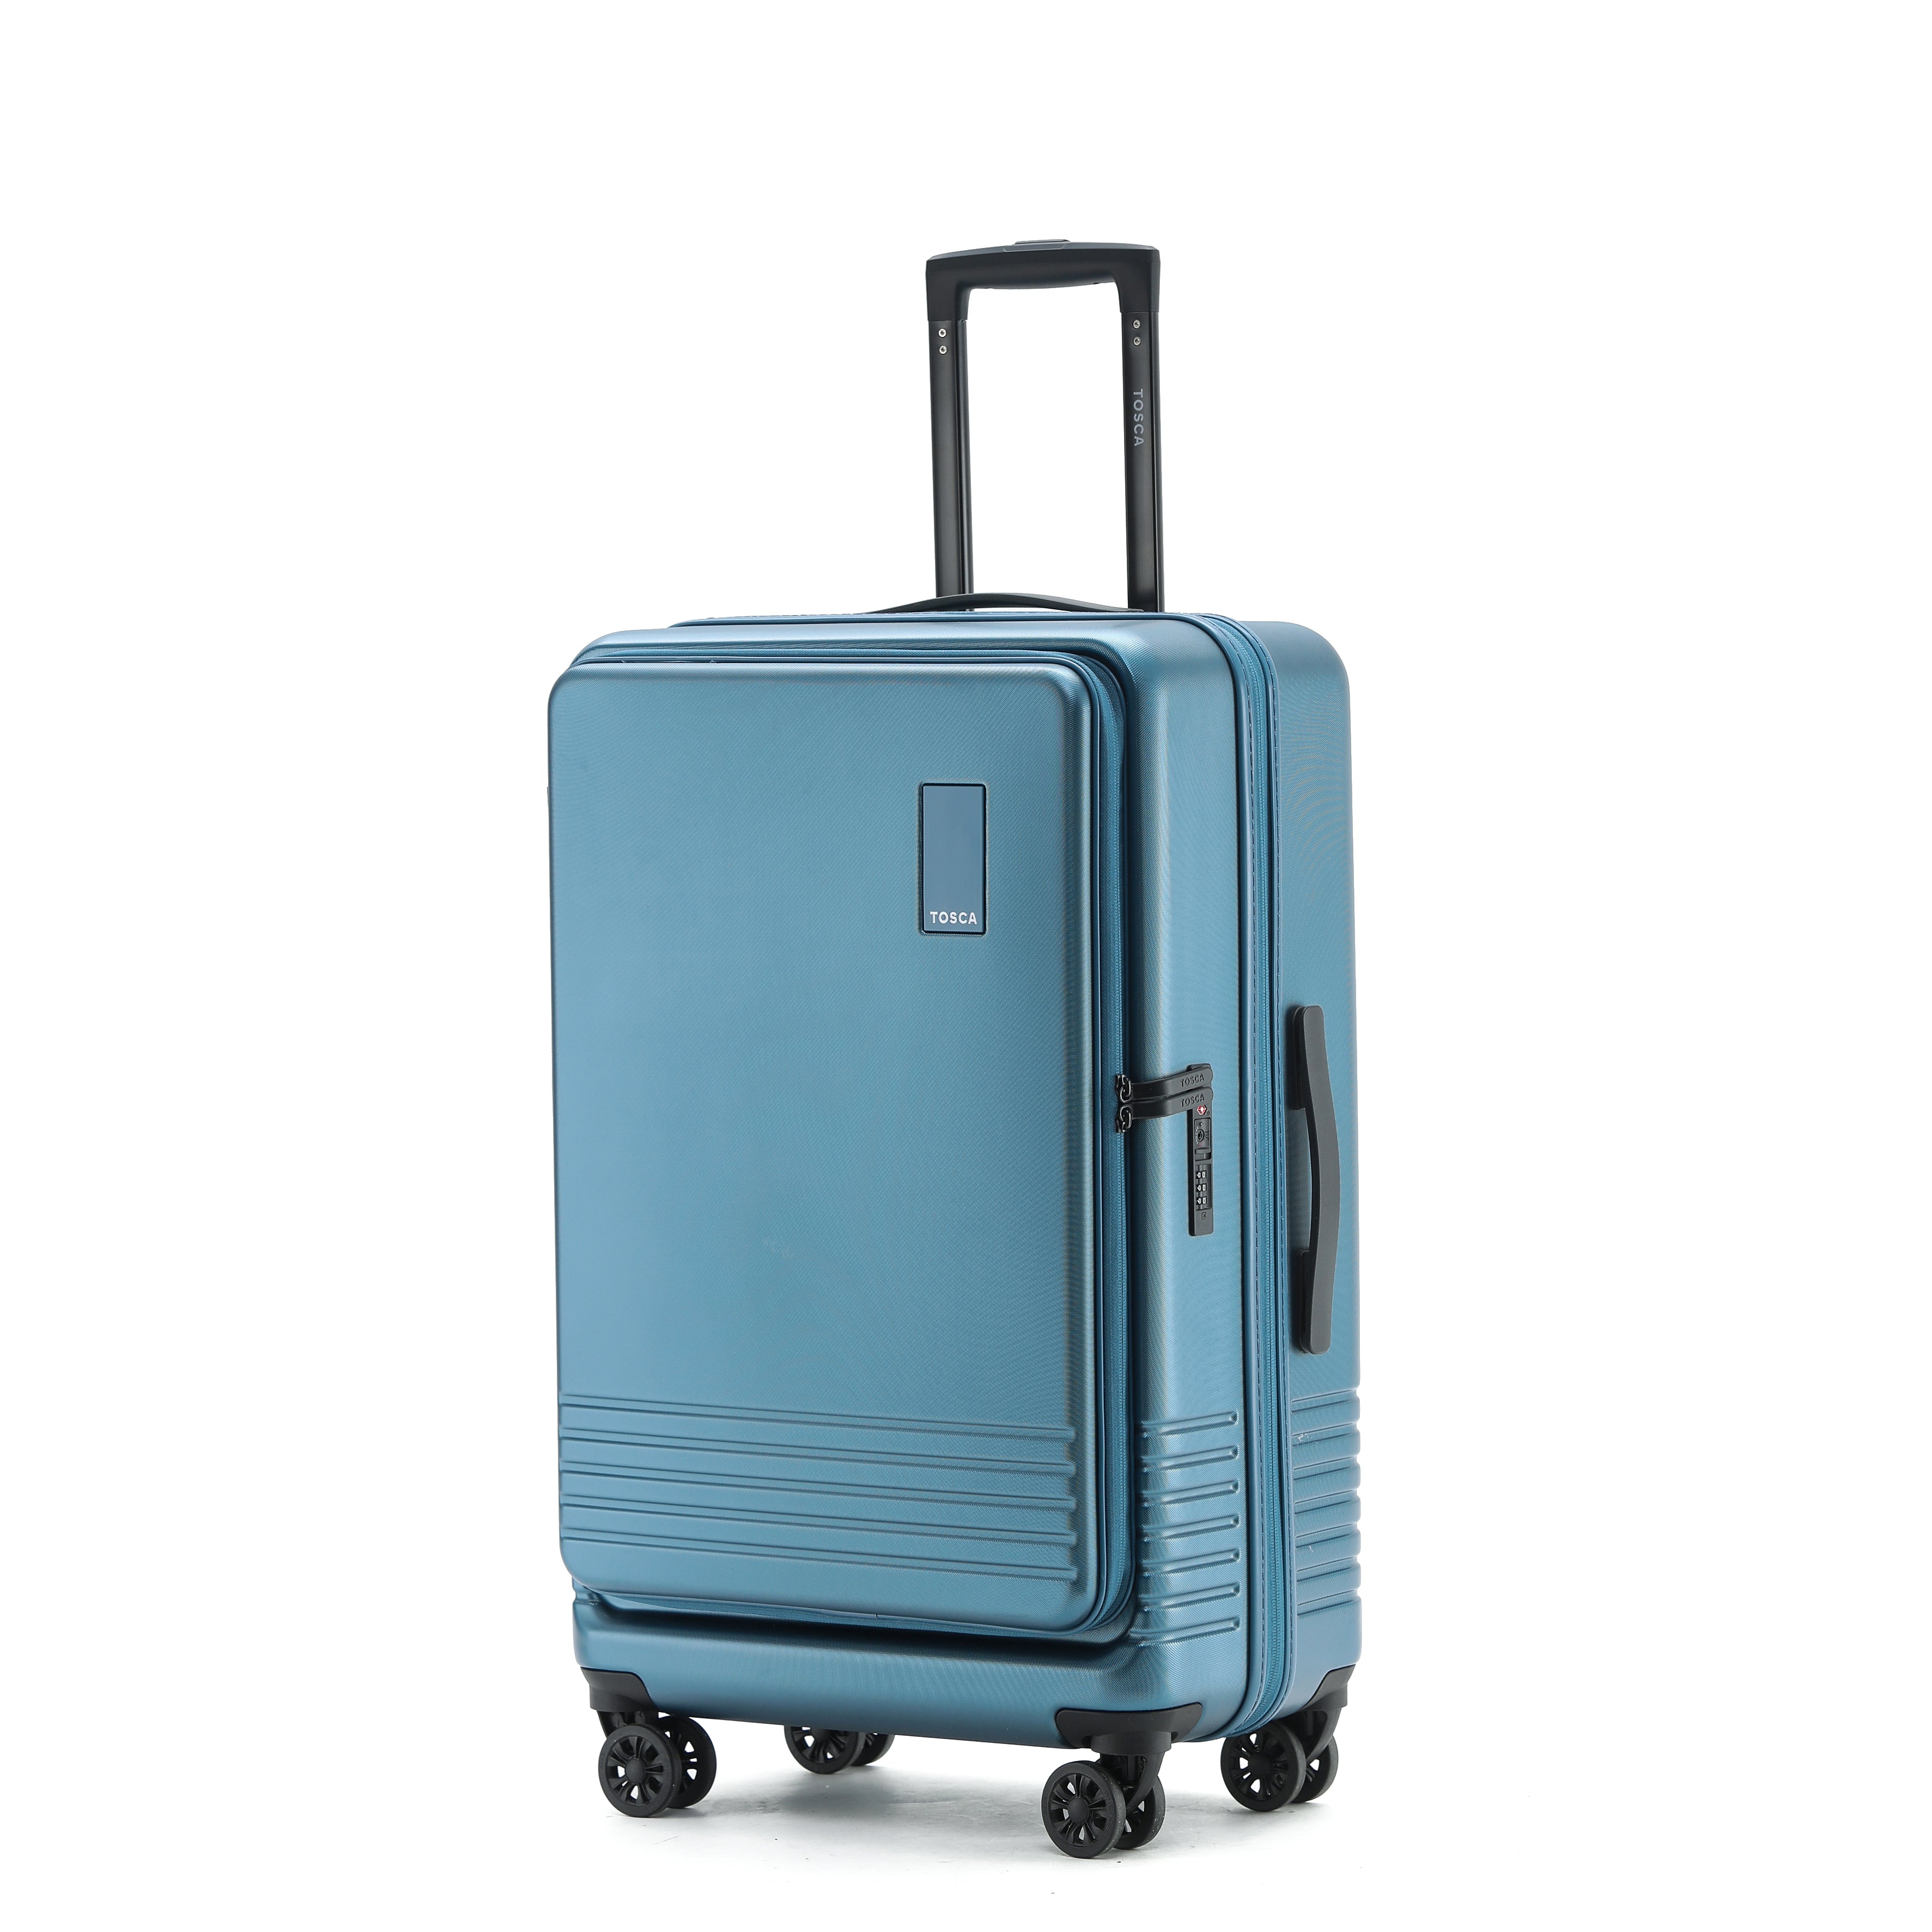 Tosca - TCA644 Horizon Front lid opening Set of 3 suitcases - Blue-8